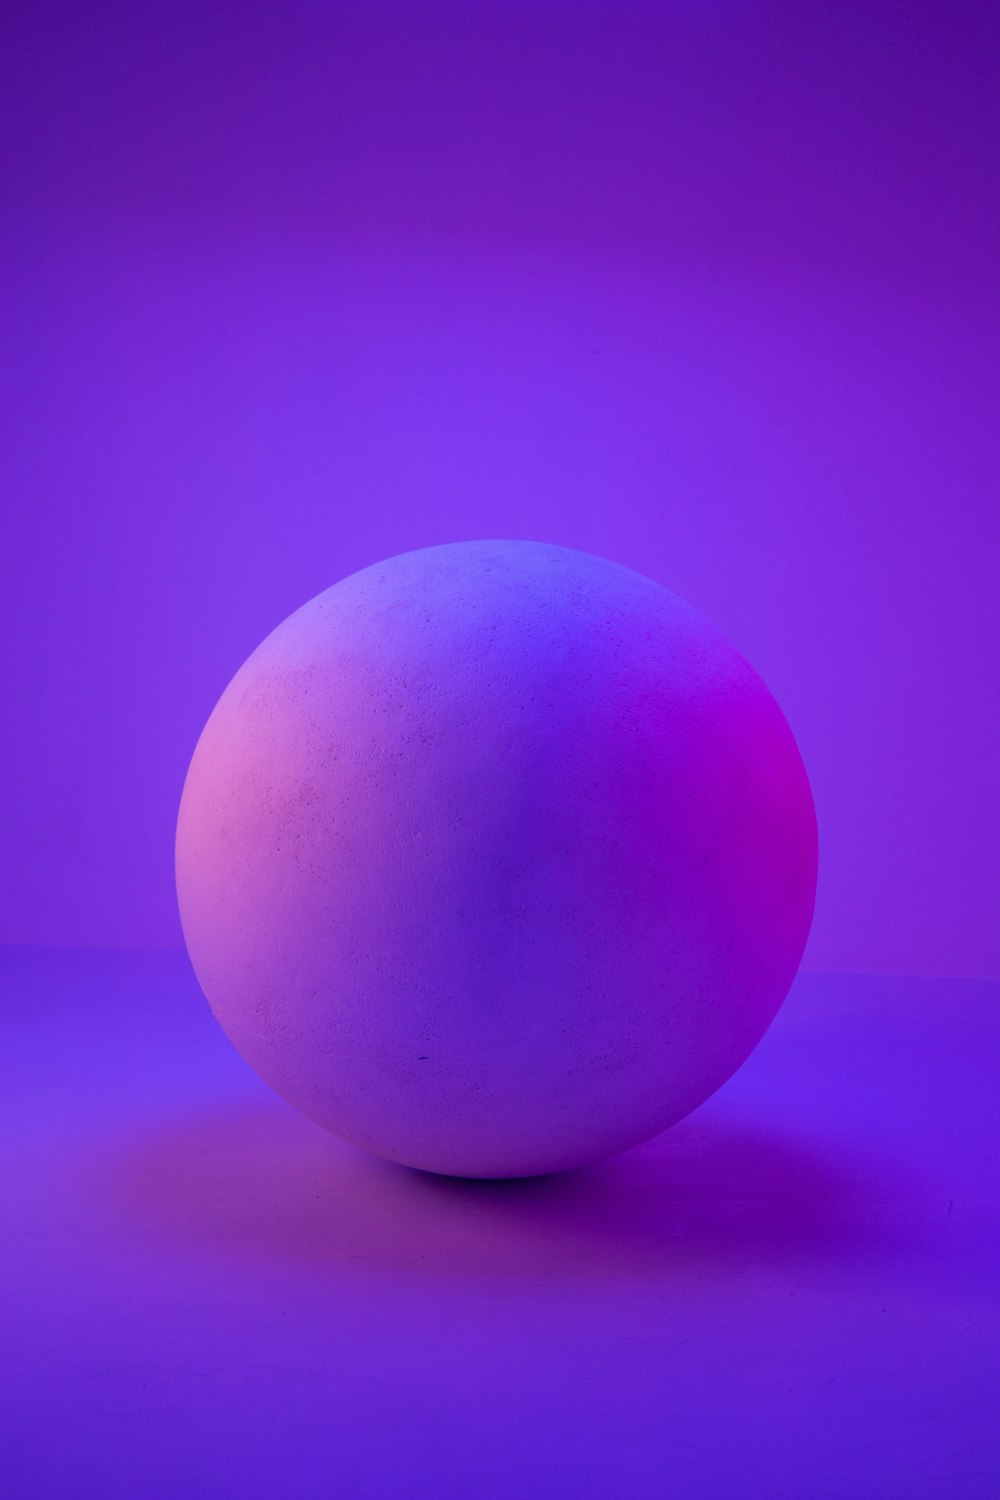 a large egg on a purple surface